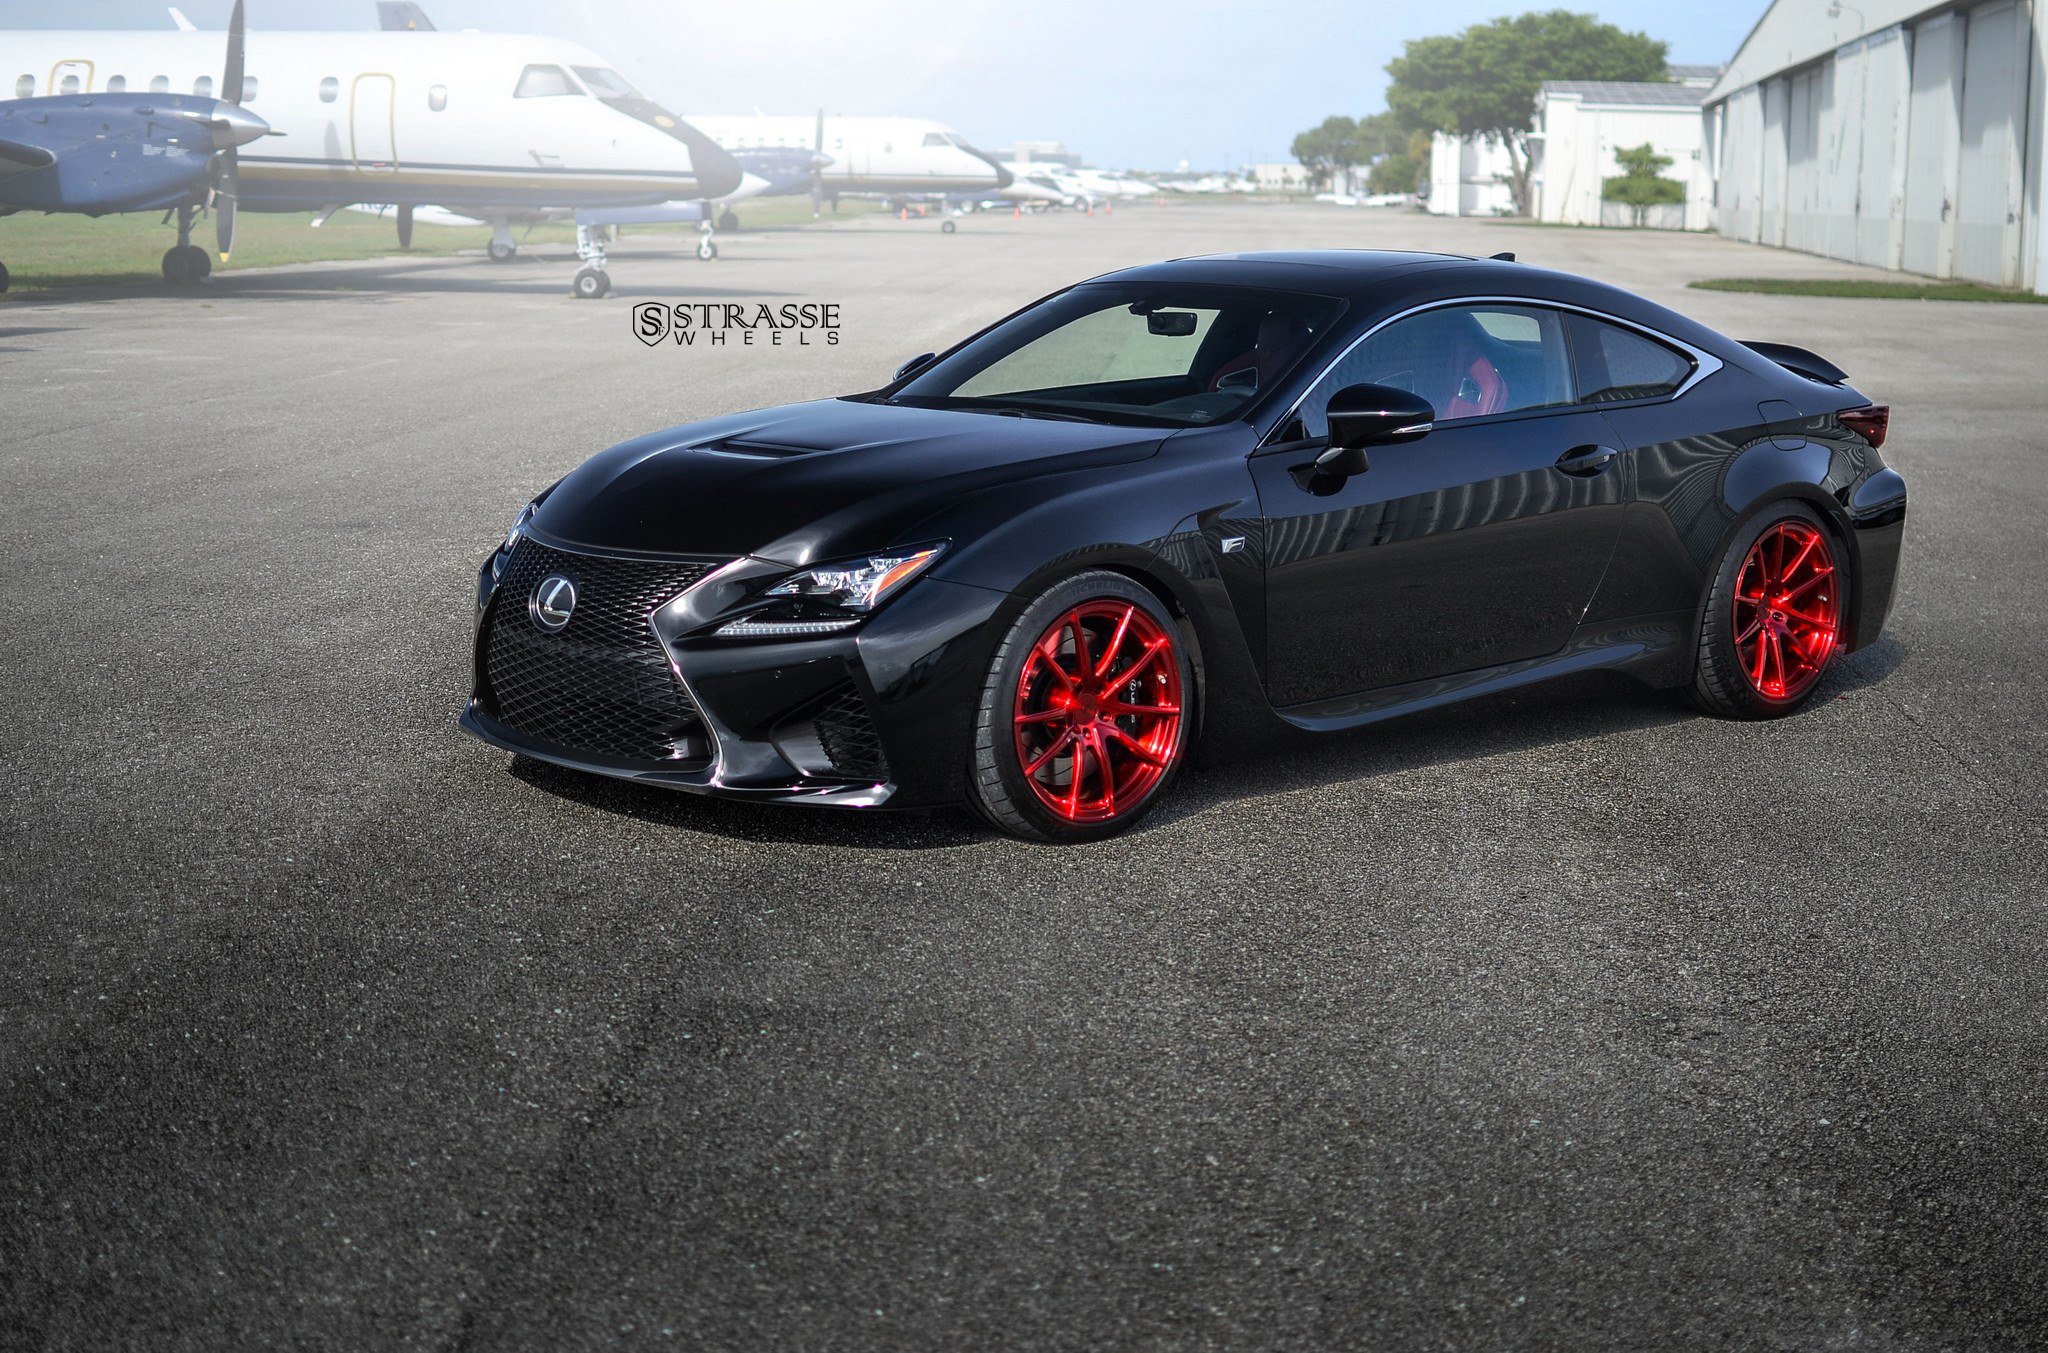 strasse, Wheels, Gallery, Lexus, Rc f, Black, Cars, Coupe Wallpaper